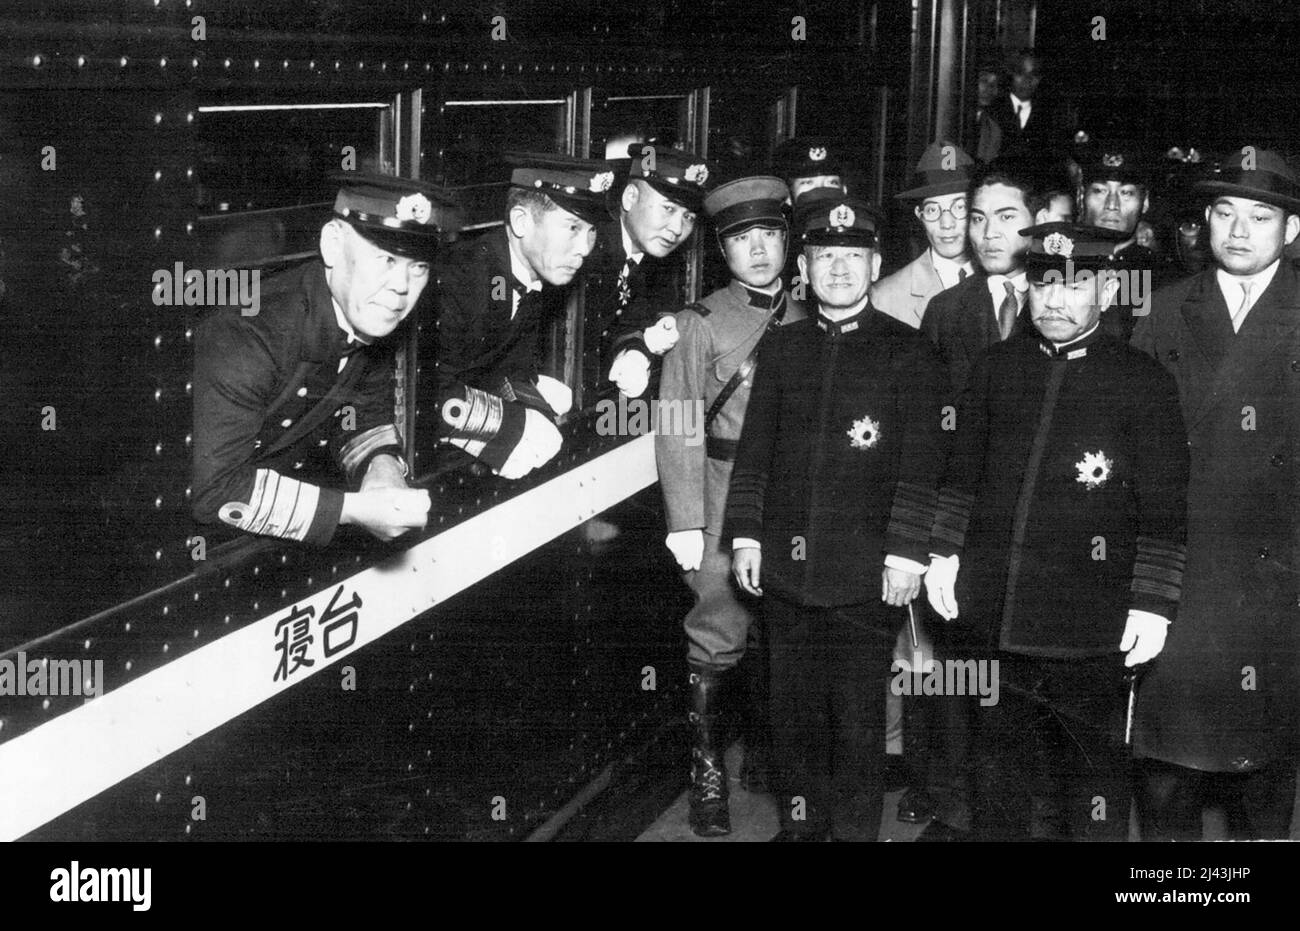 Japanese Naval Delegate to the Geneva Disarmament Conference, Vice-Admiral Shushi Nagano taken at the Tokyo Central Station when he depurated for Geneve. Picture Shows from left in train Vice-Admiral Nagano, Rear-Admiral Hasegawa, a delegate, and out of the train, standing in black uniform, form left, Admiral Keisuke Okada, Naval Minister, Admiral Kanji Okada, one of the biggest leaders of the Navy. December 5, 1932. Stock Photo